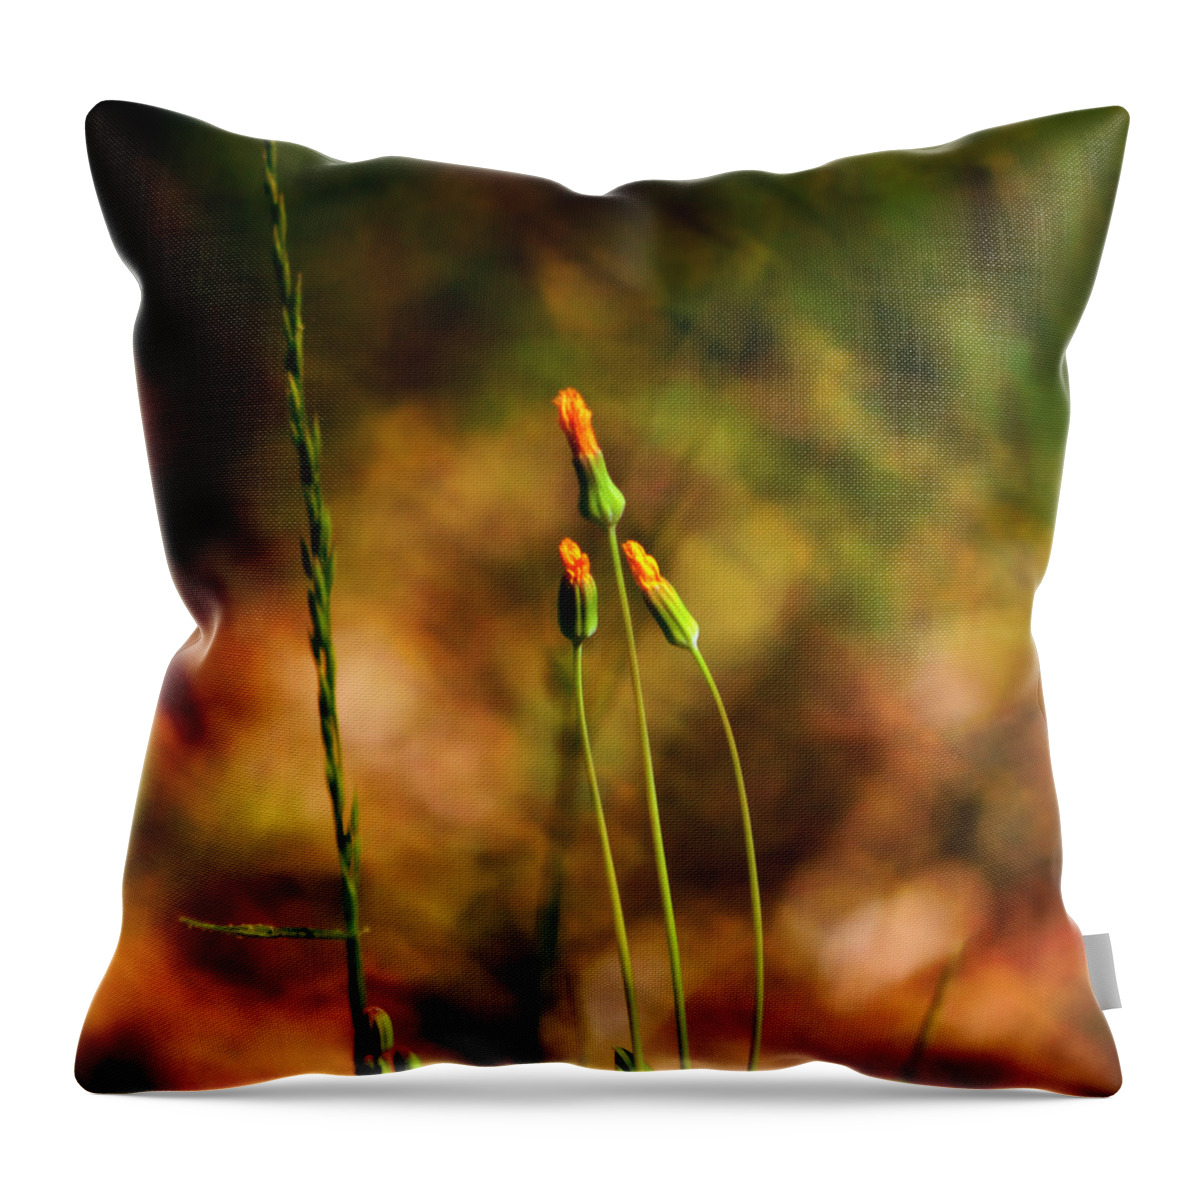 Flower Throw Pillow featuring the photograph Opening Soon by Deena Stoddard